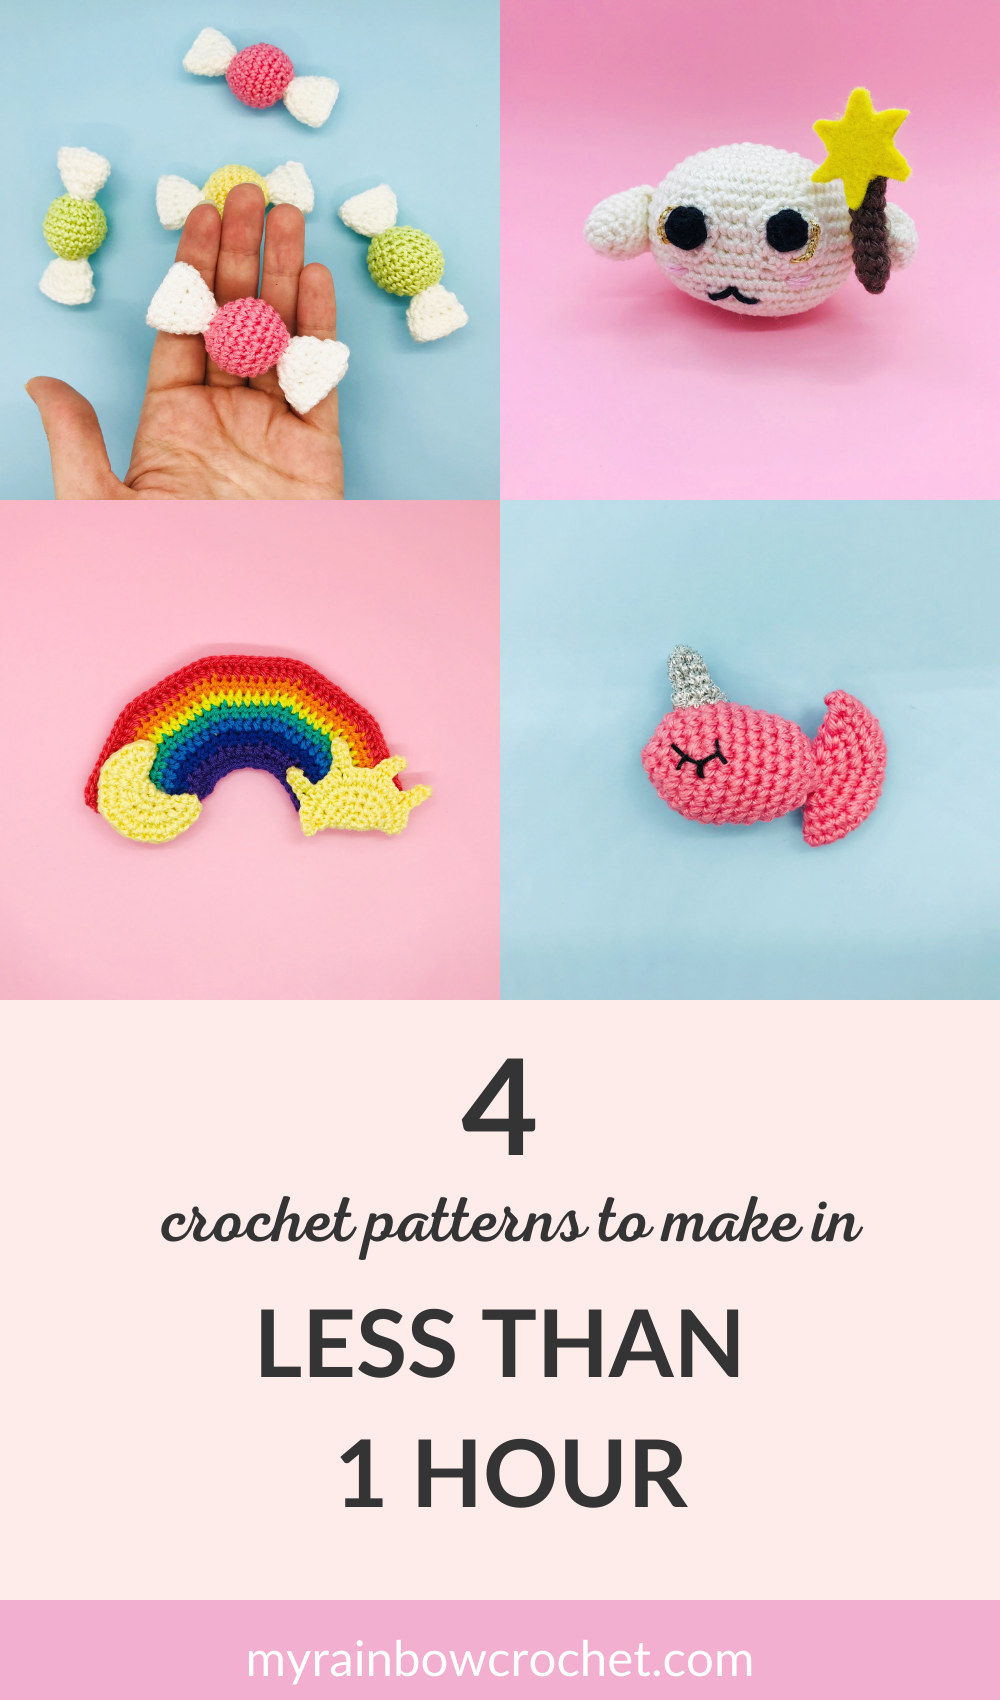 4 crochet patterns to make less than 1 hour